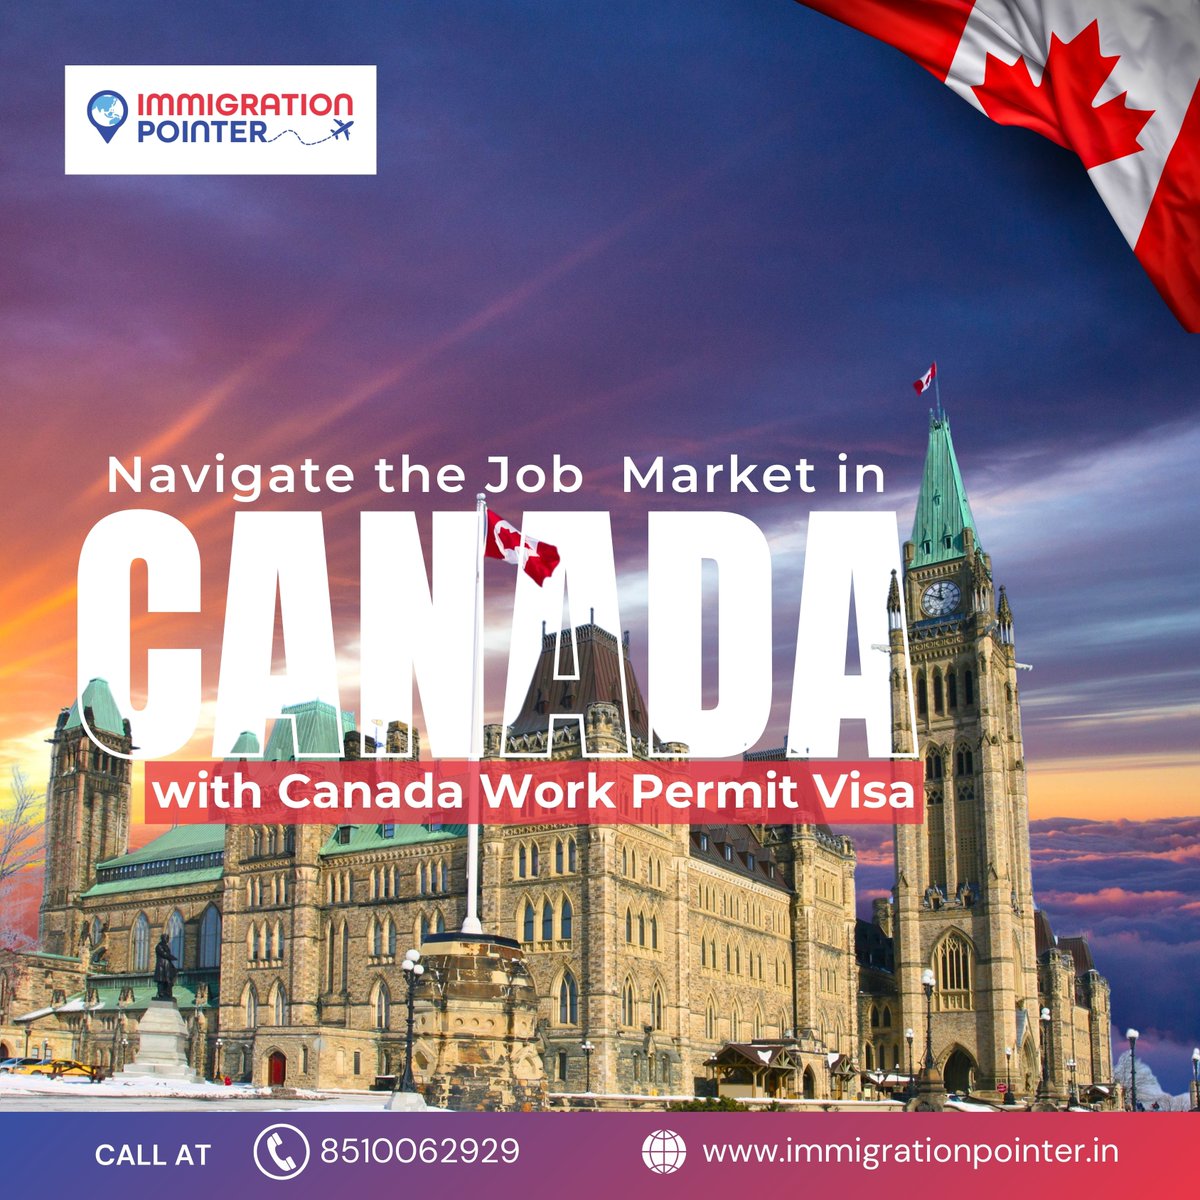 Immigration Pointer: Guiding your path to career success in Canada.
For More Information:-
Visit:- immigrationpointer.in
Call:- (+91)8510062929
 #canada_life #canadaimmigration #canada  #immigration #immigrationlaw #immigratetocanada #immigrationservices